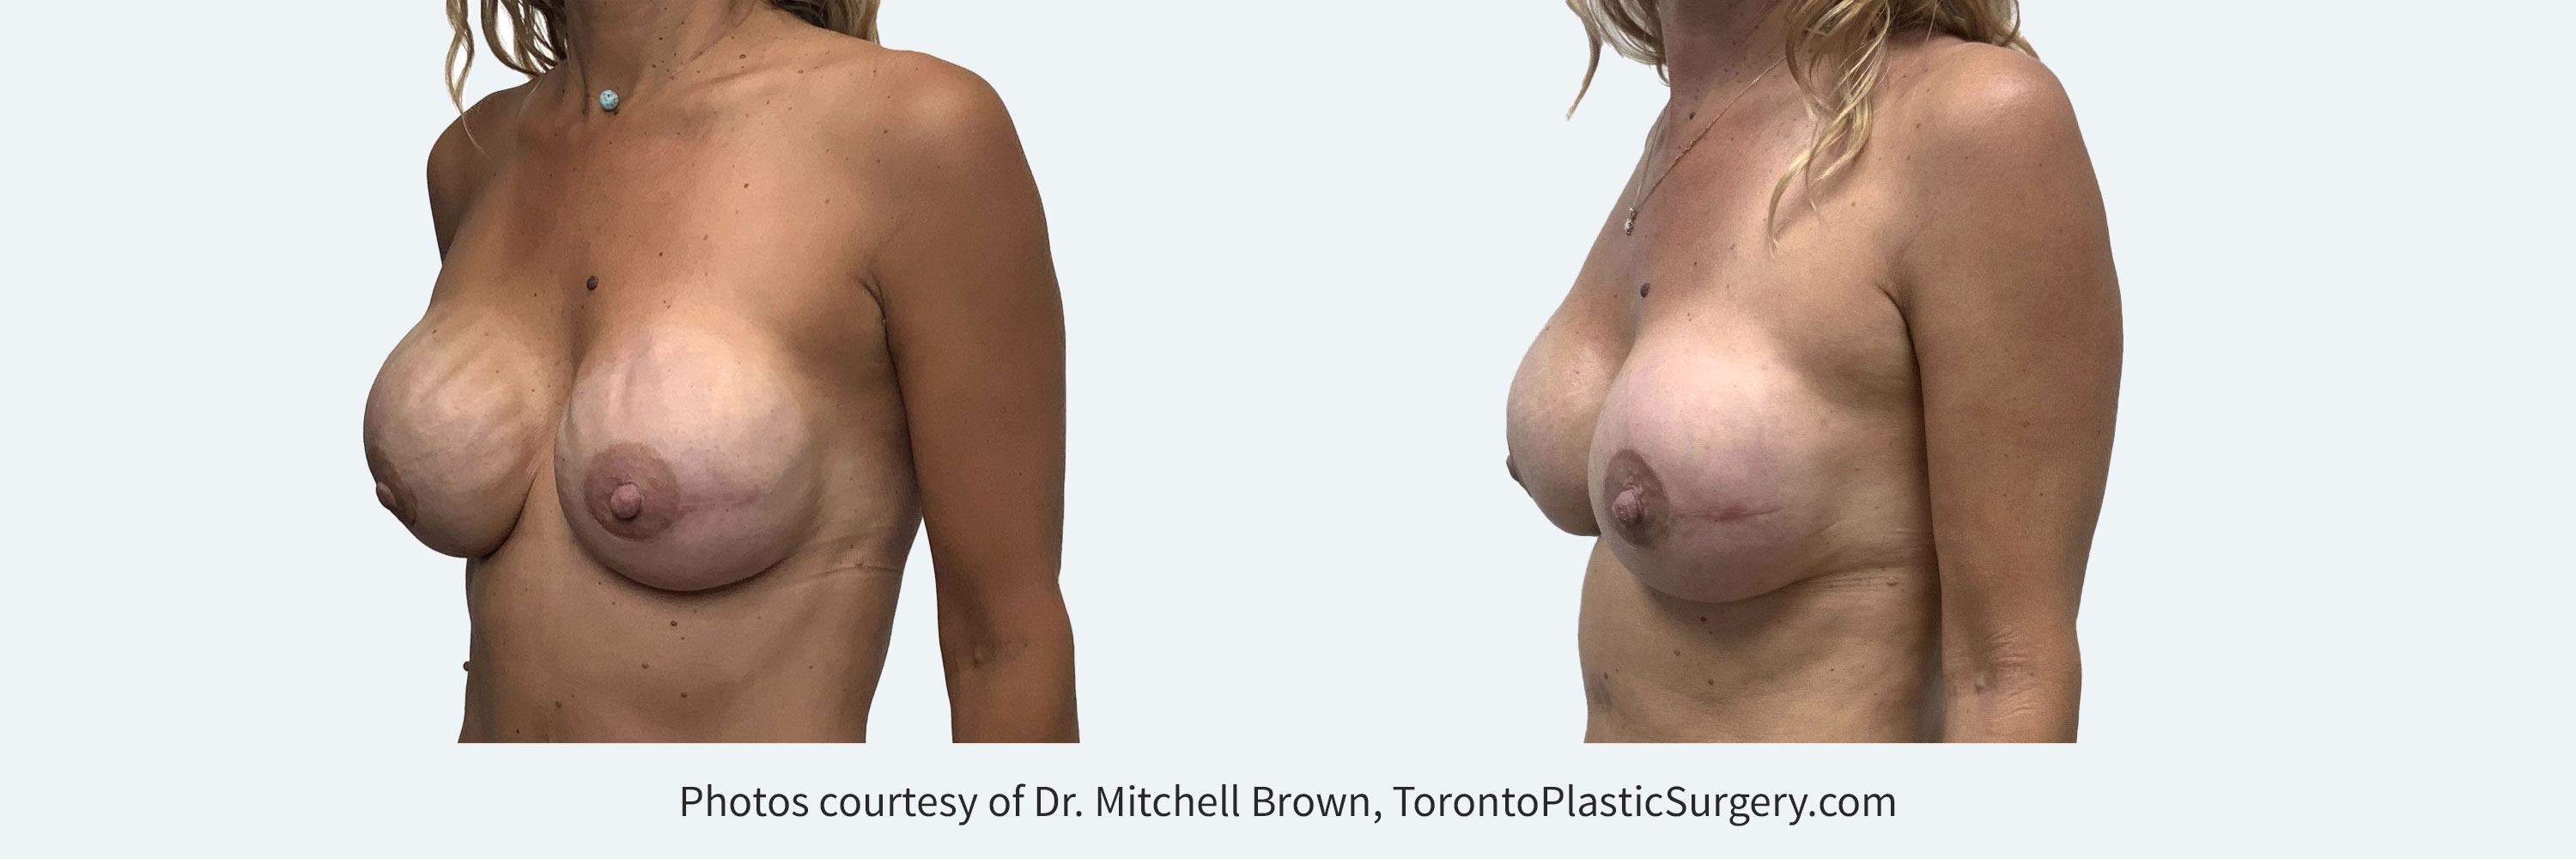 Nipple sparing mastectomy reconstructed using breast implants with severe visible rippling. Corrected with a combination of more highly cohesive implants, fat grafting and insertion of an internal sling for implant support. Before and 6 months after.